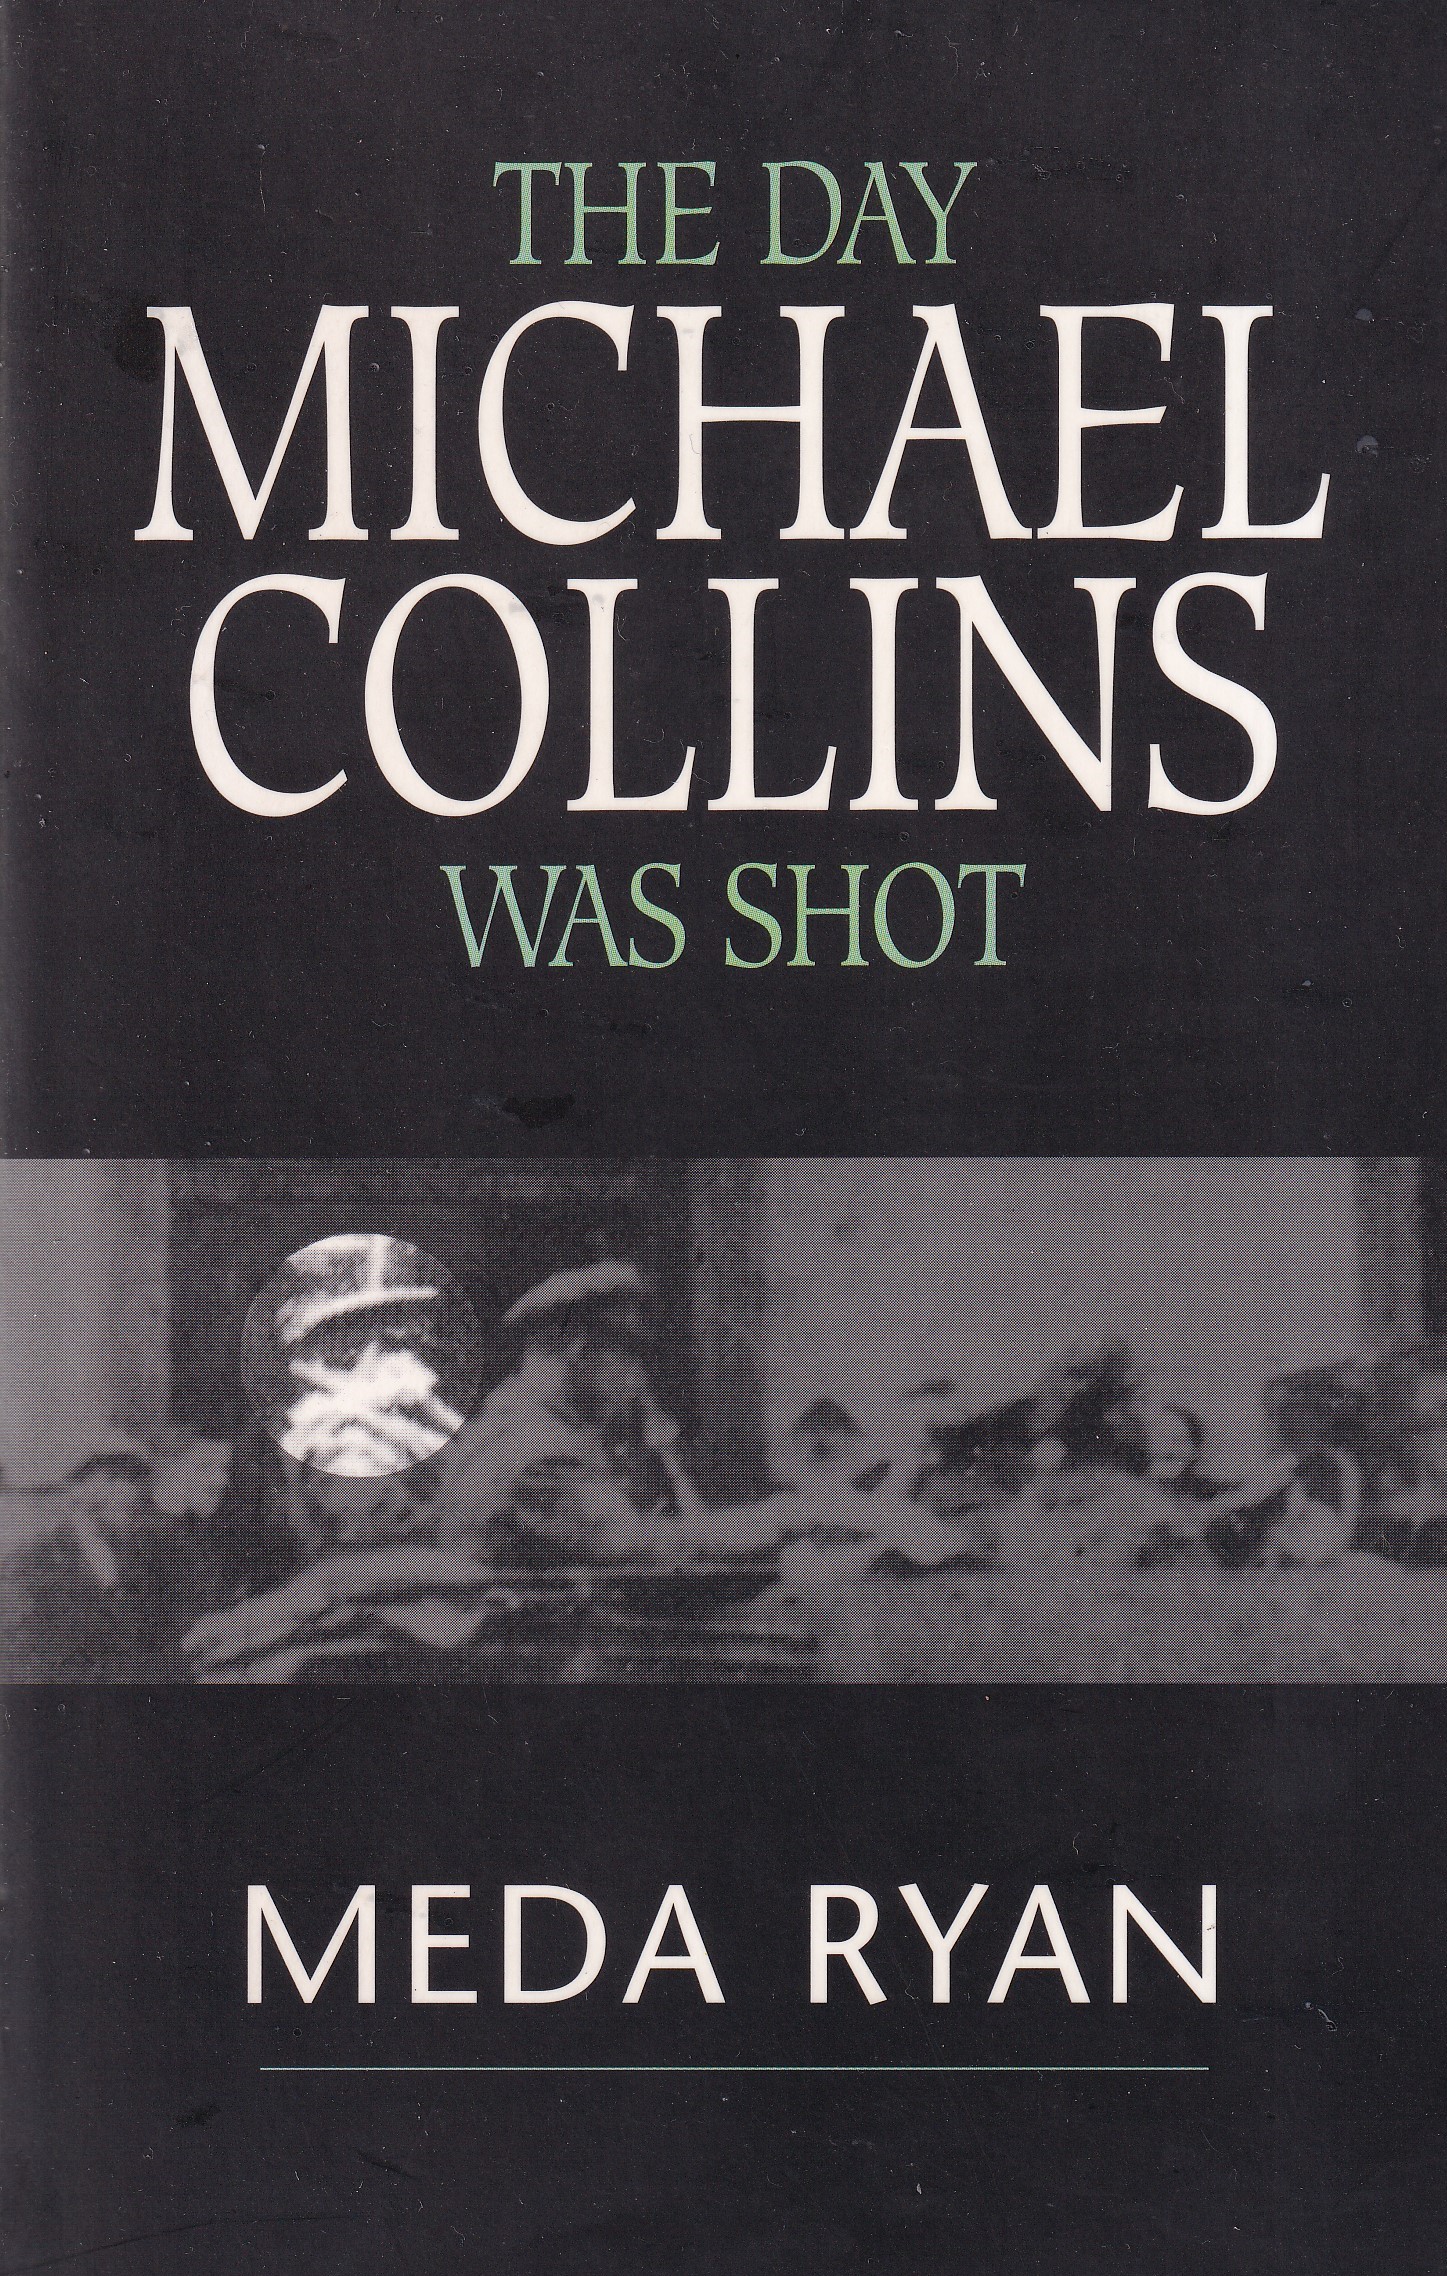 The Day Michael Collins Was Shot | Meda Ryan | Charlie Byrne's